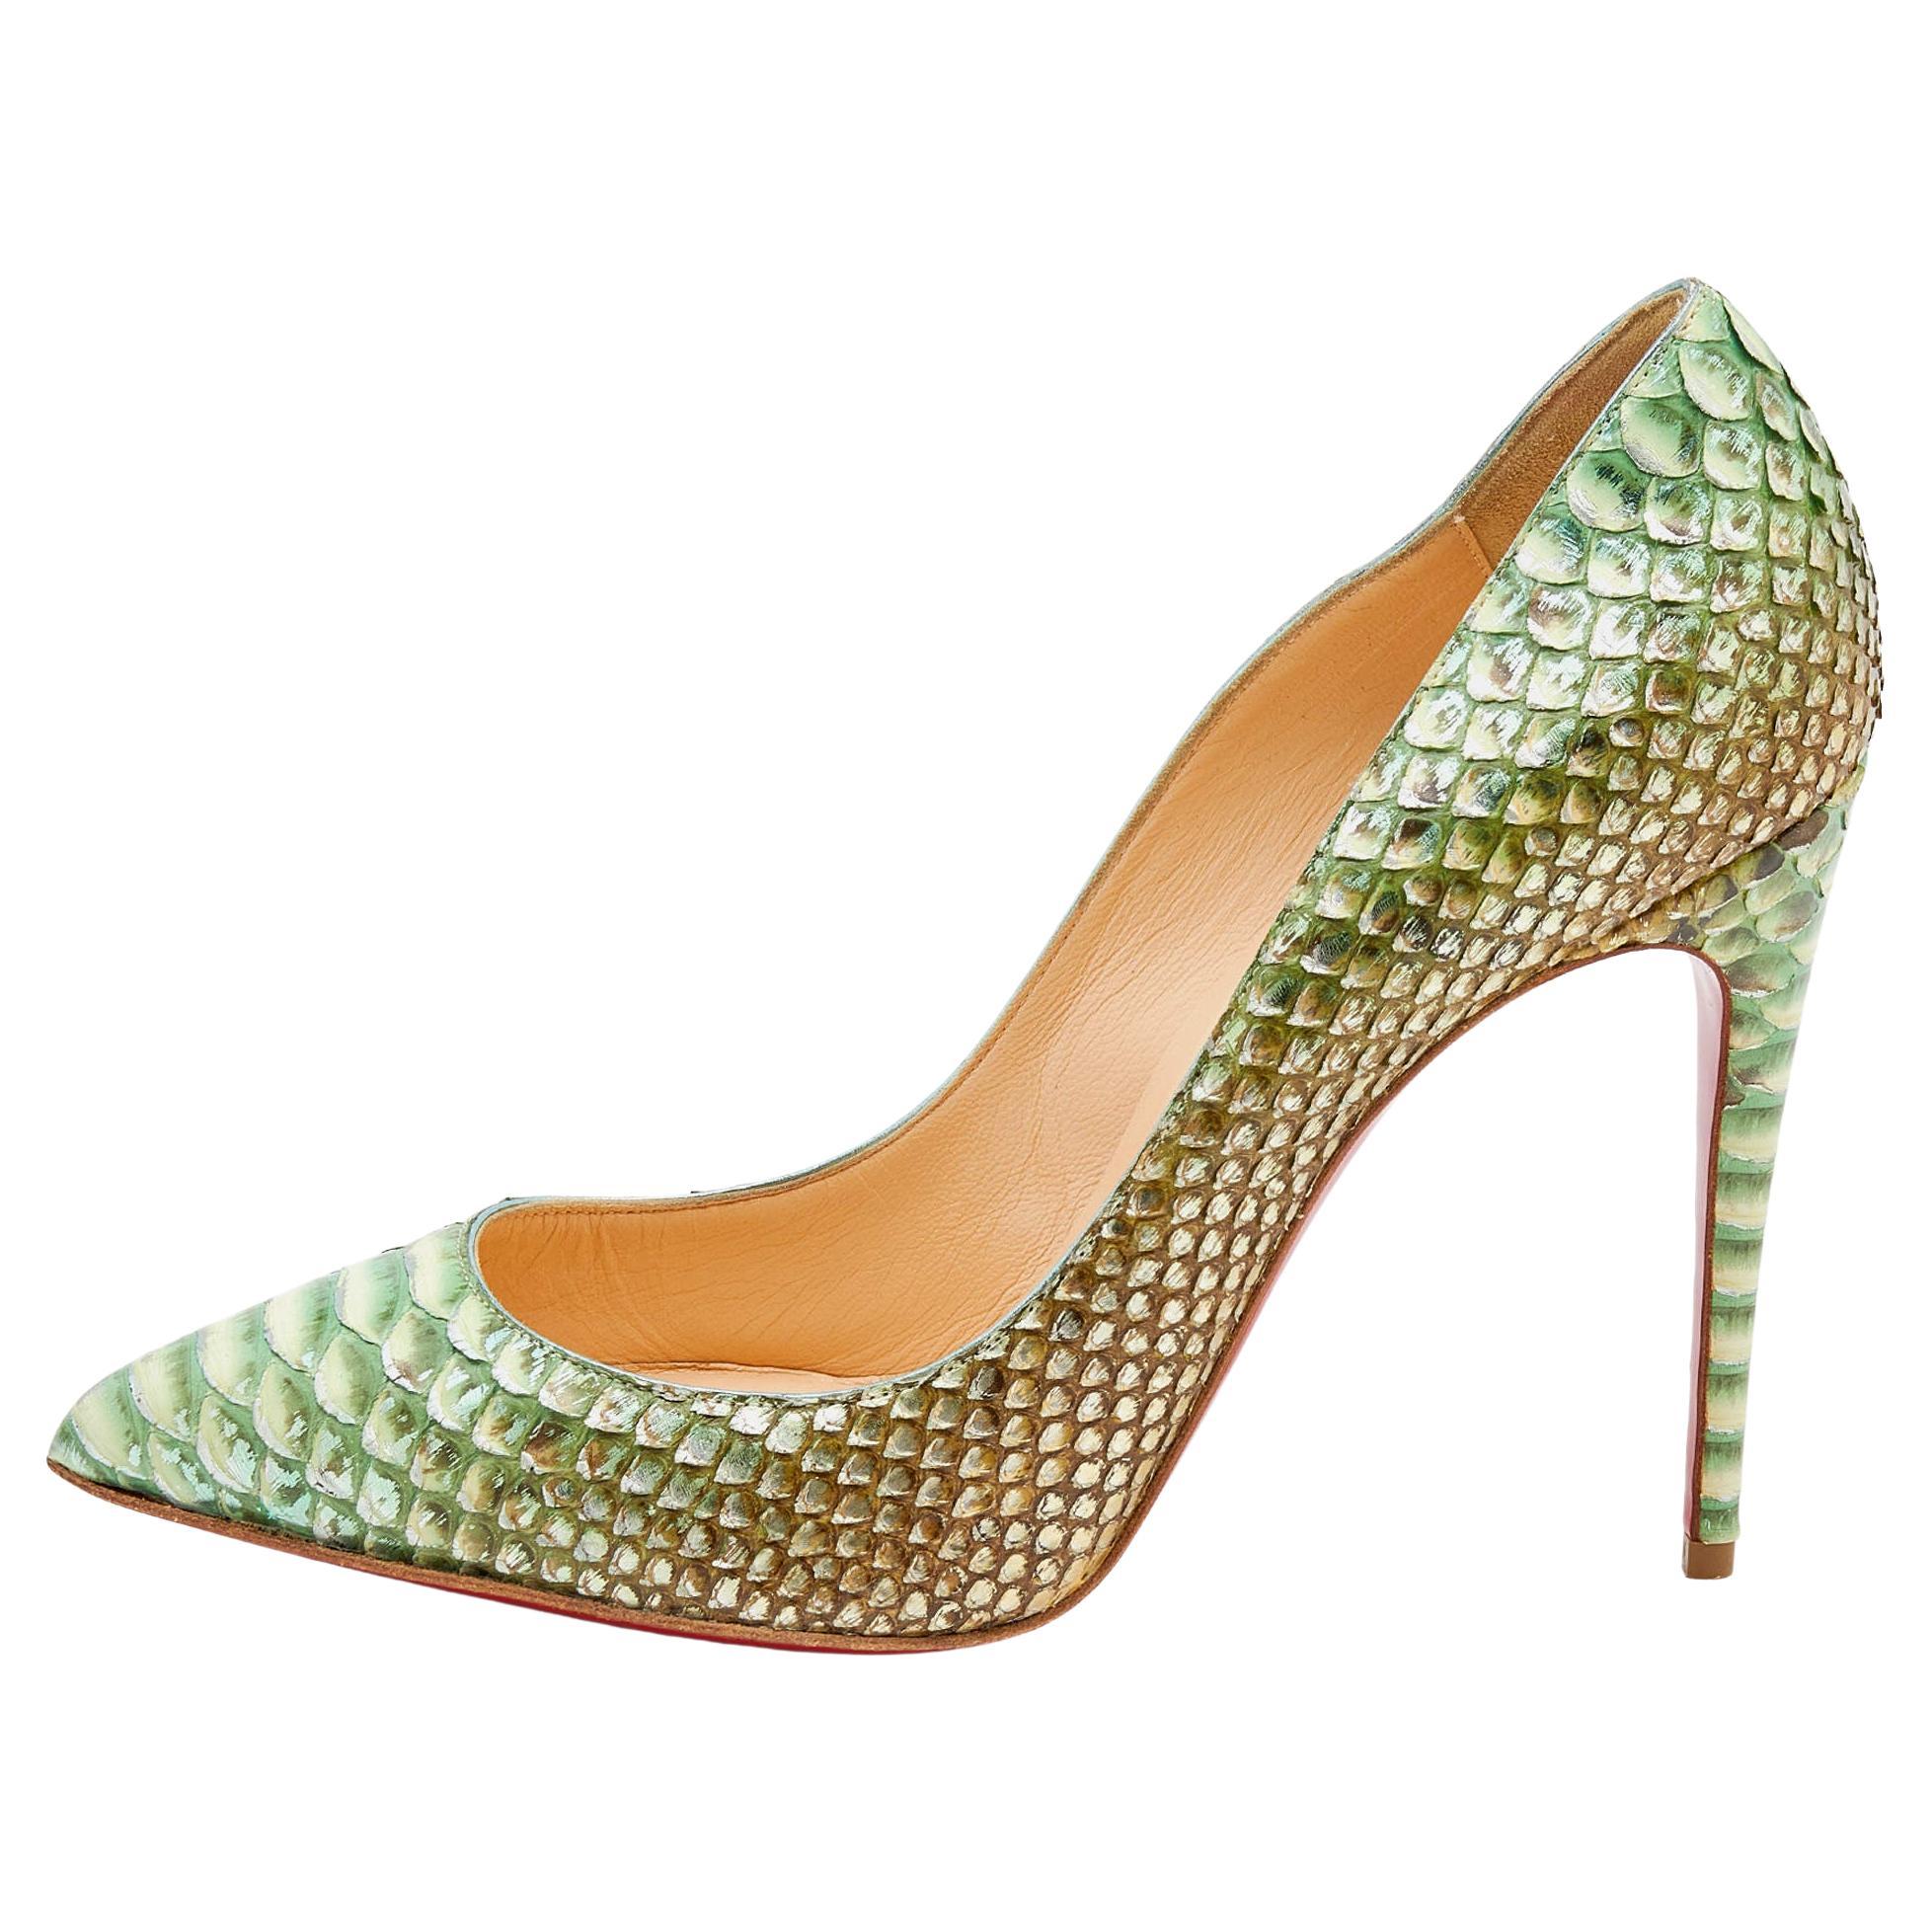 Christian Louboutin Multicolor Python So Kate Pointed Toe Pumps Size 39